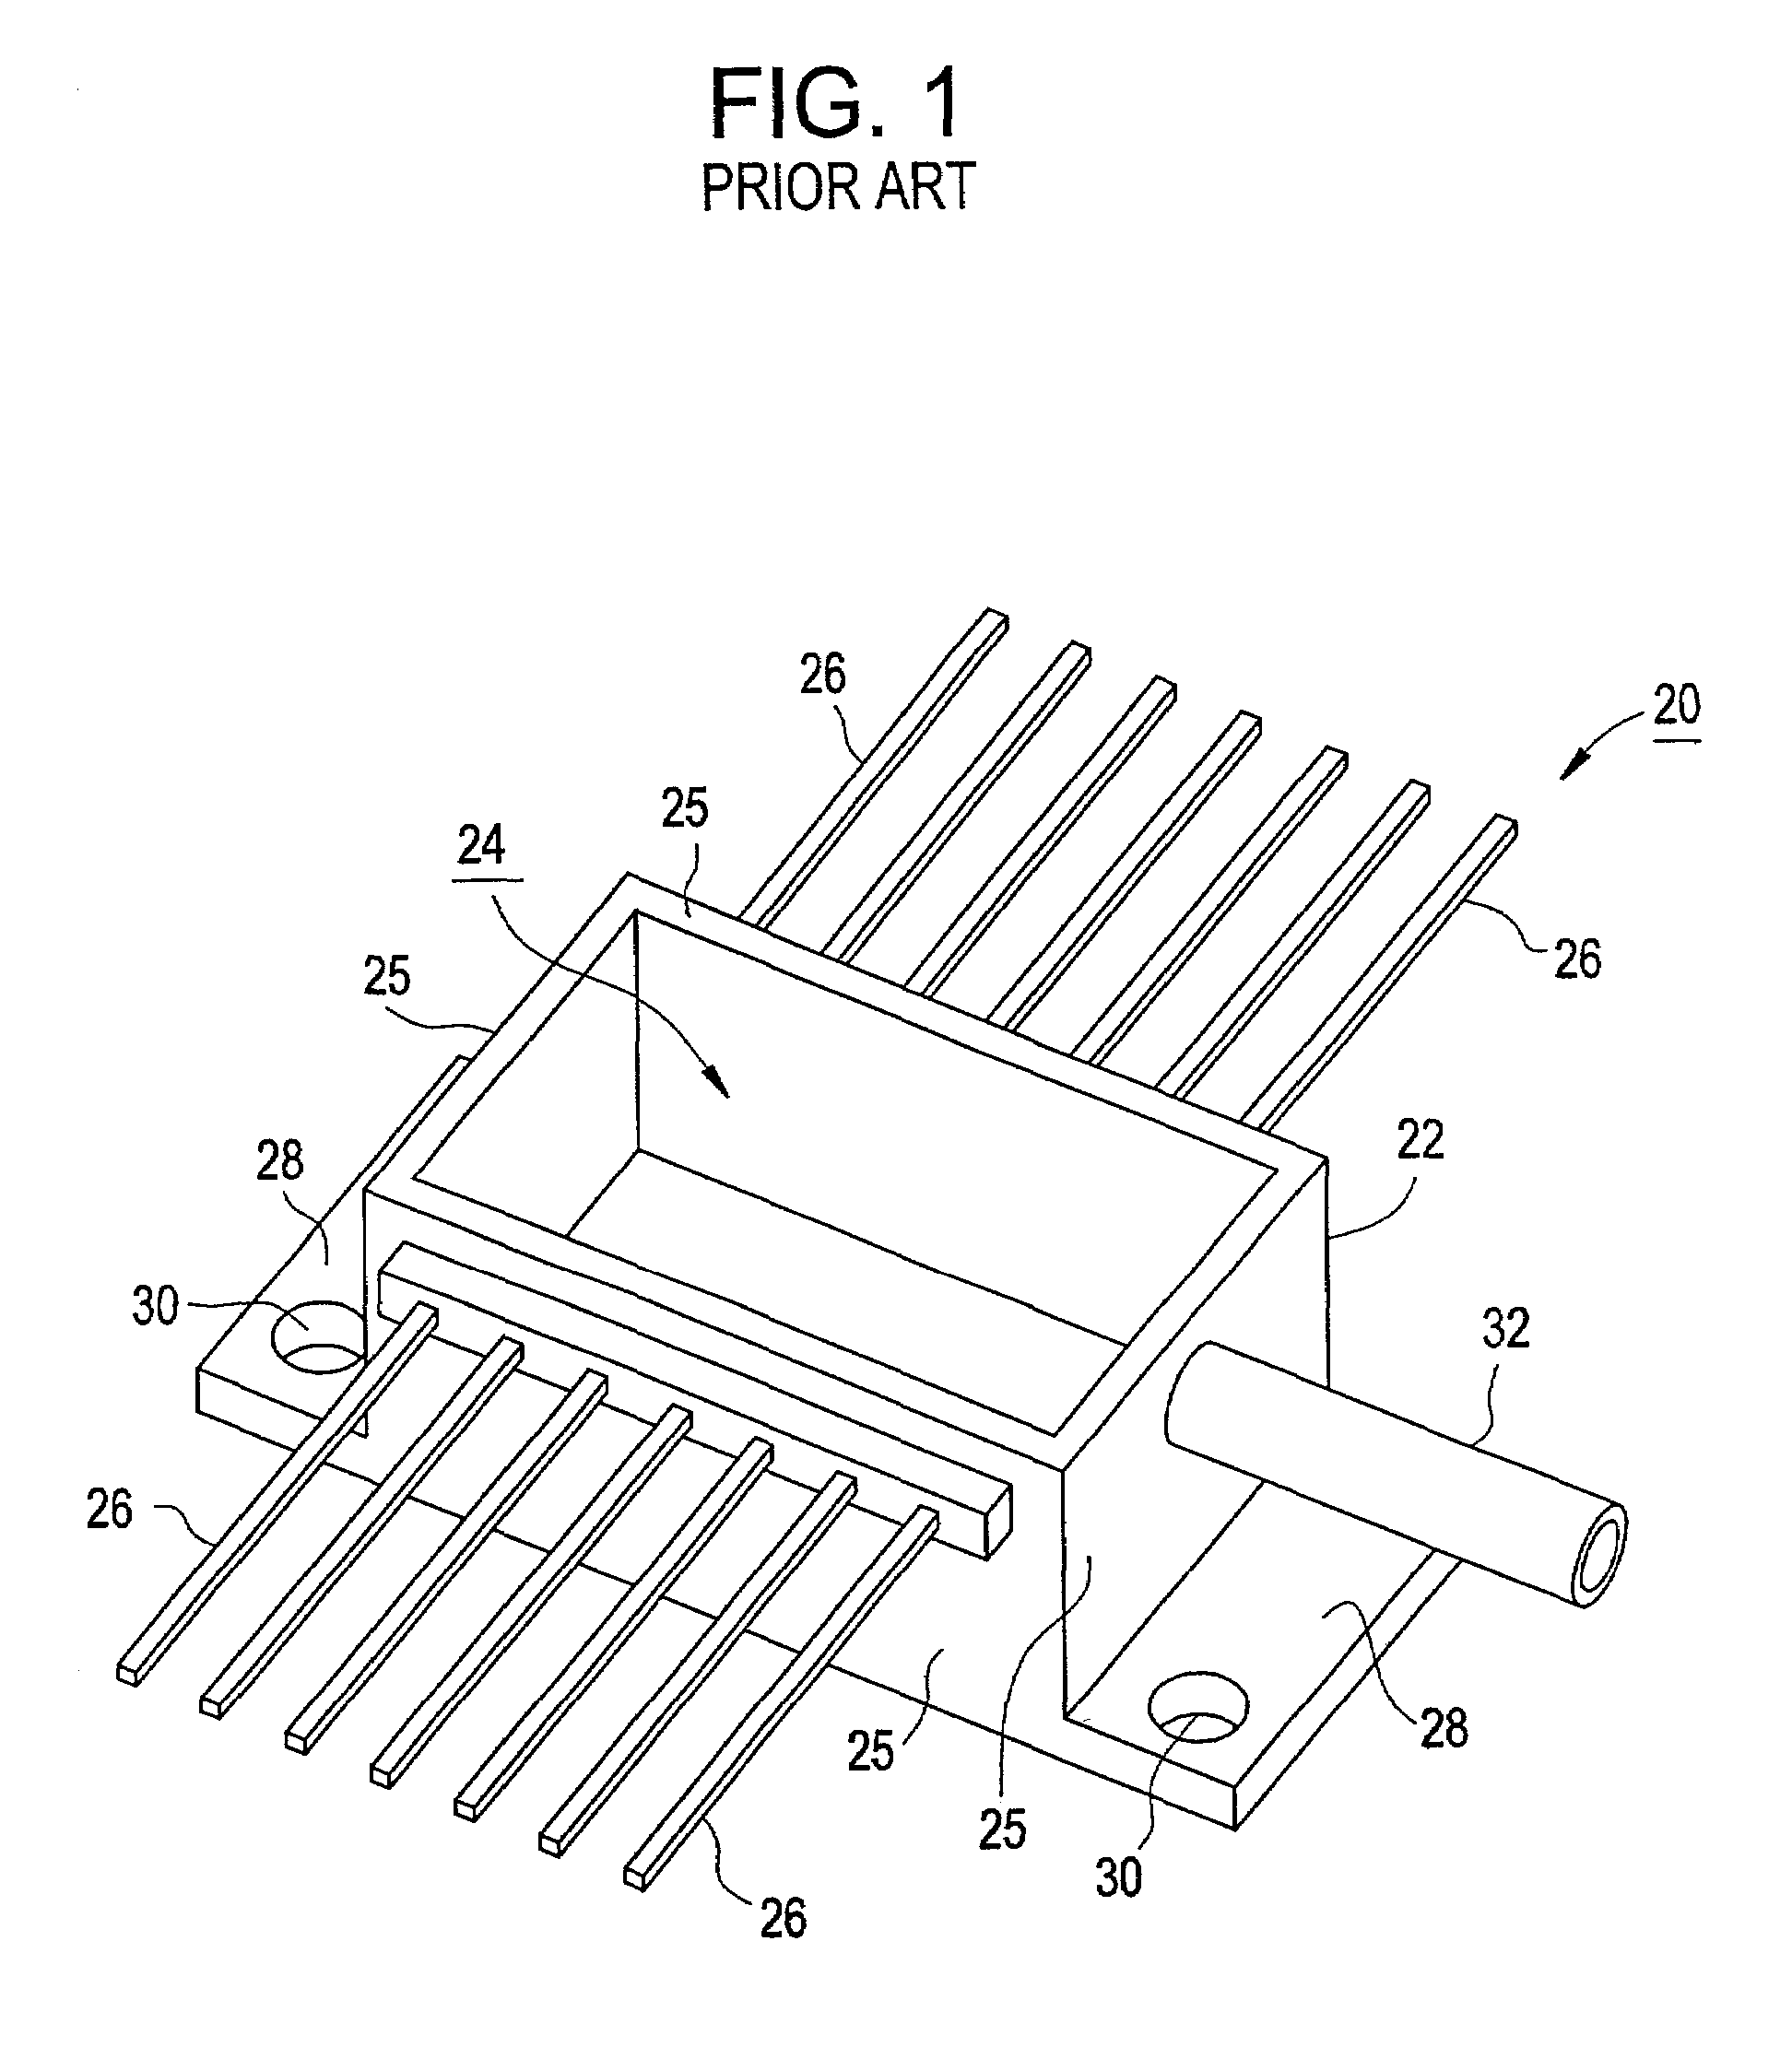 High performance optoelectronic packaging assembly